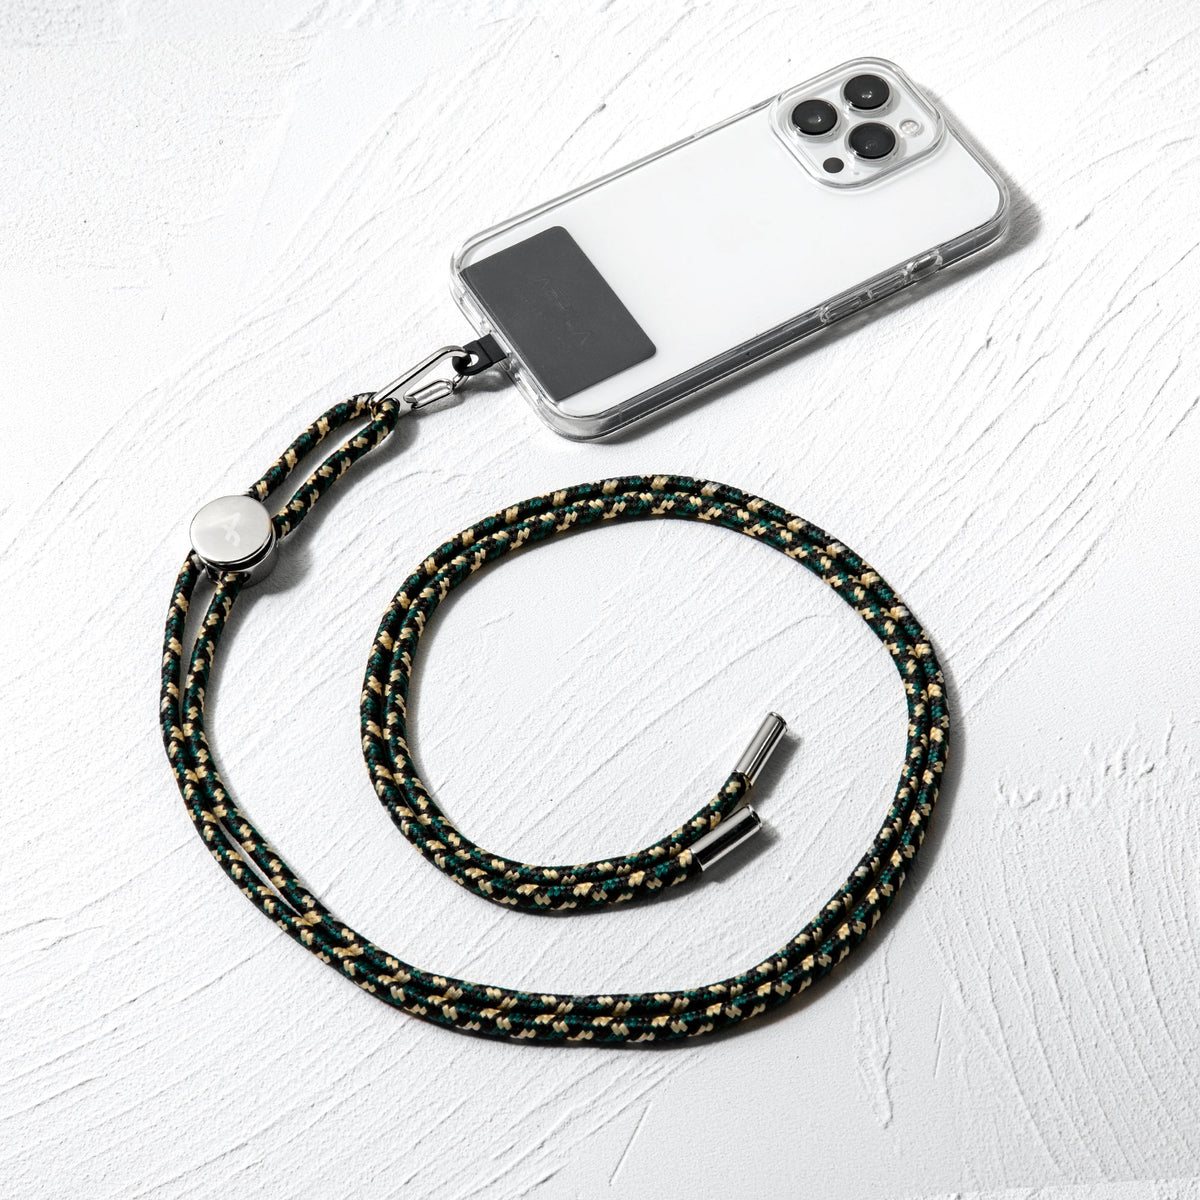 NORE Phone Lanyard set with Connector Patch Card | ADVENTURE Collection - AERILA